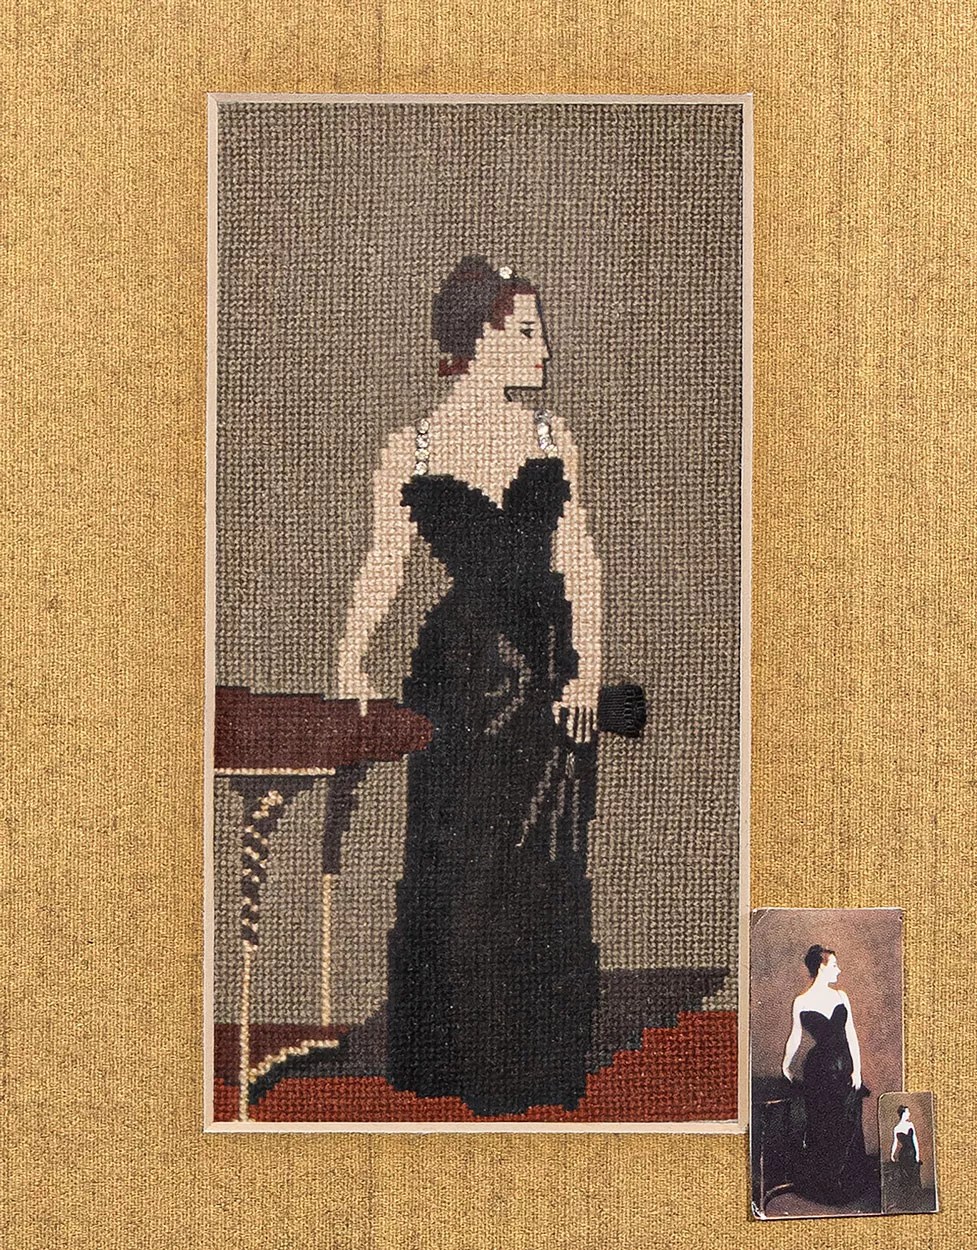 Cross-Stitch Compulsion: Work by Maxine Booth Hadfield in the UIHC Collection